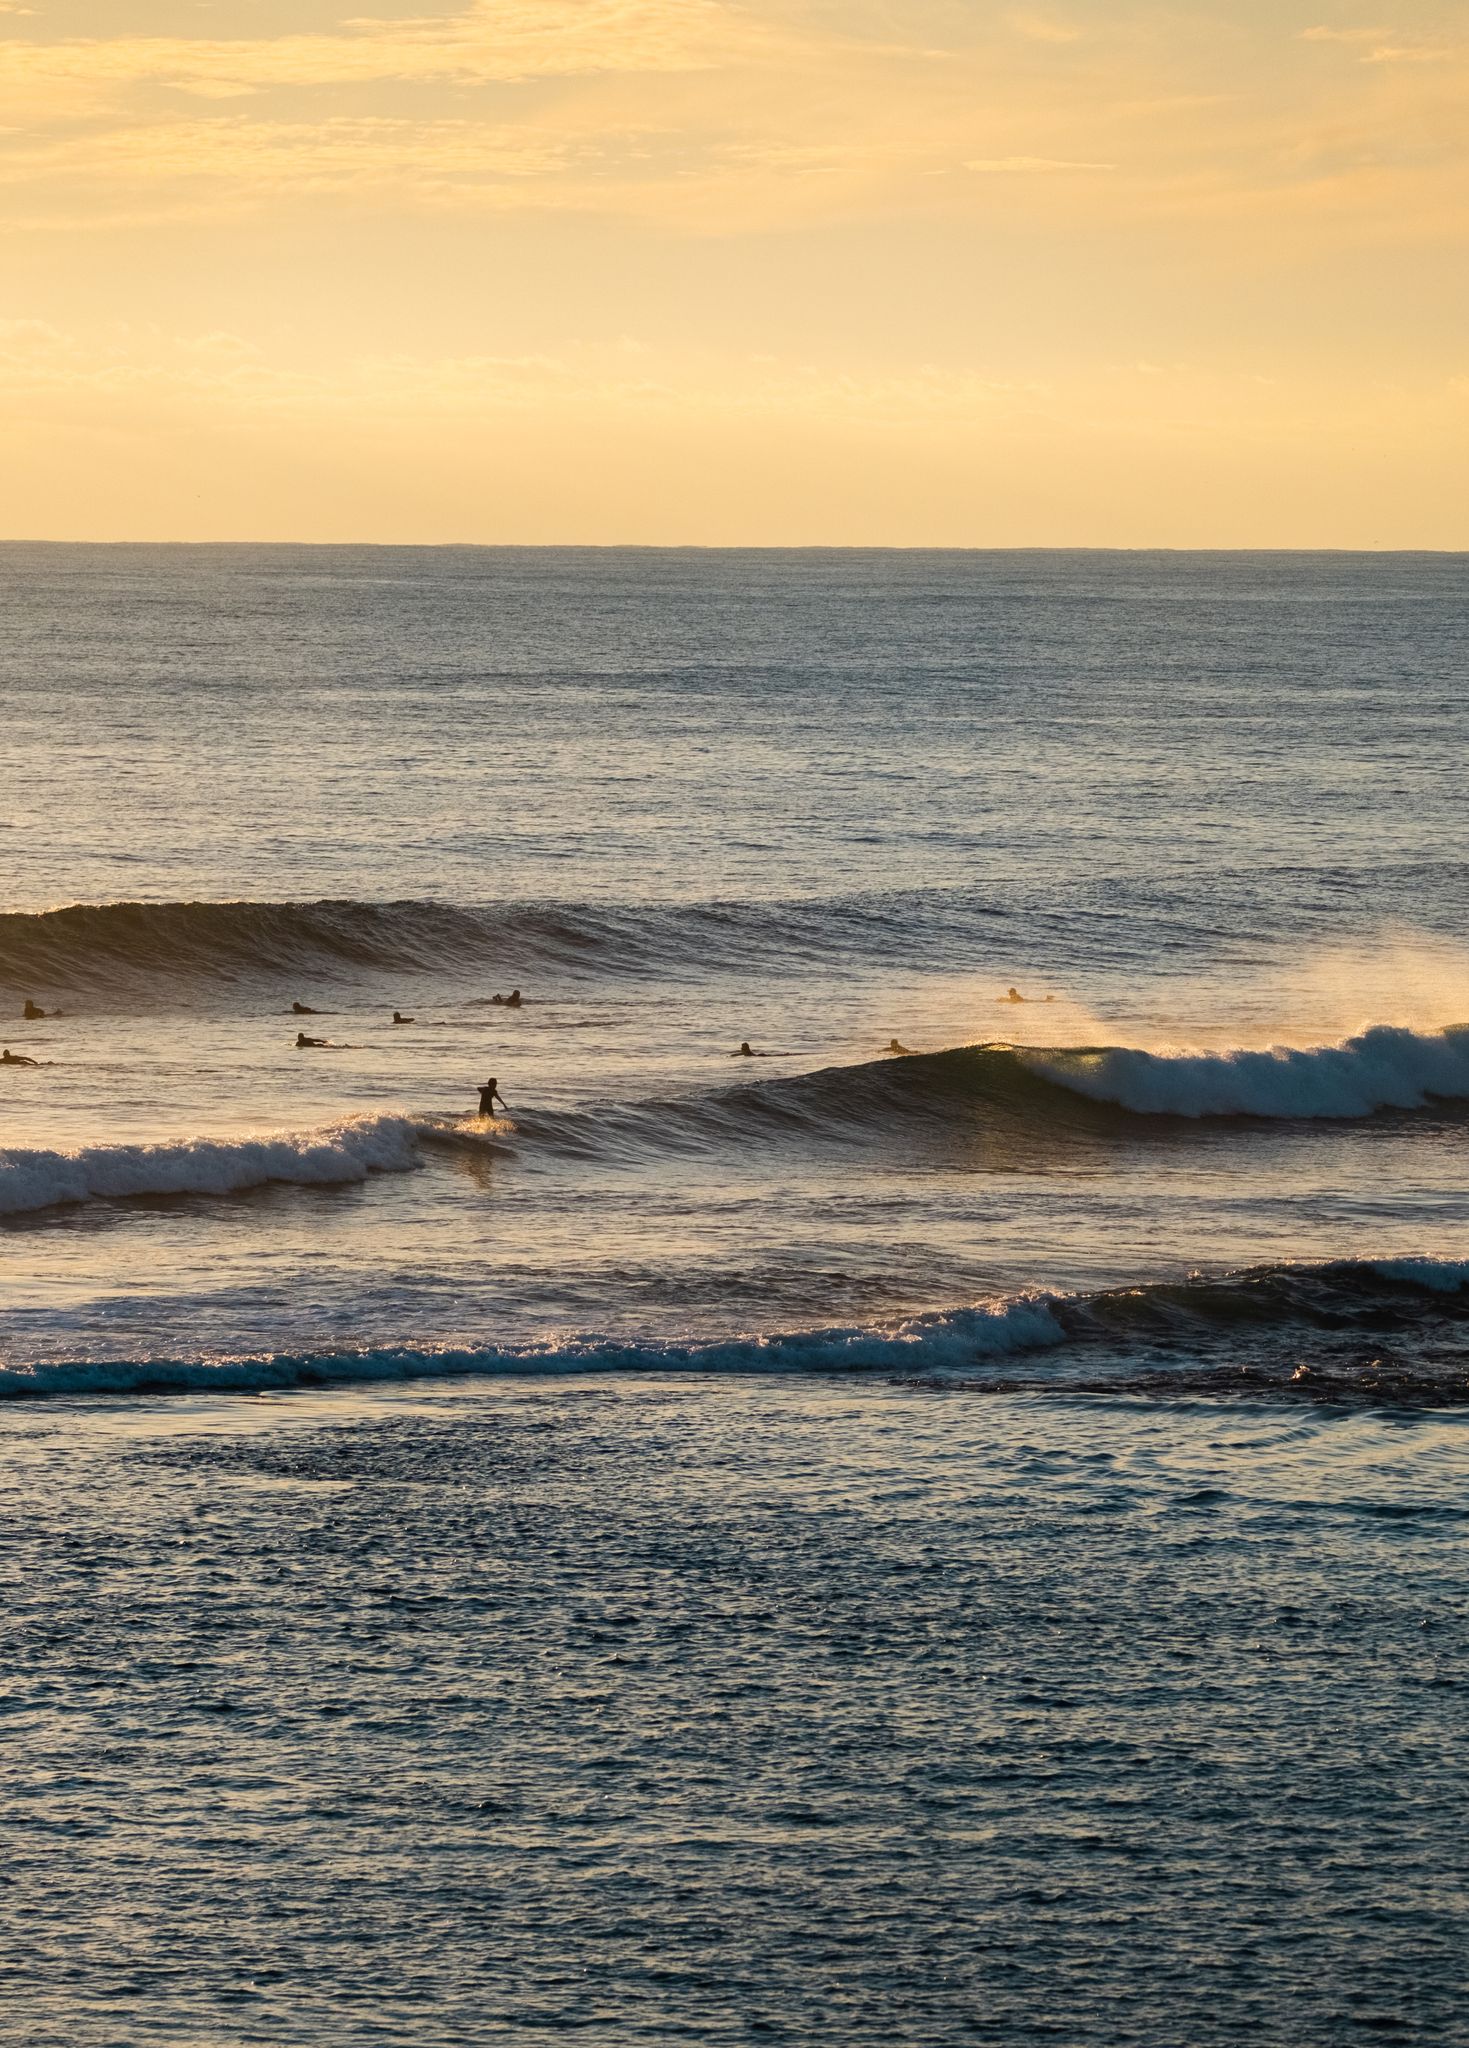 Surfers at sunset in Yallingup. Credit Rachel Claire